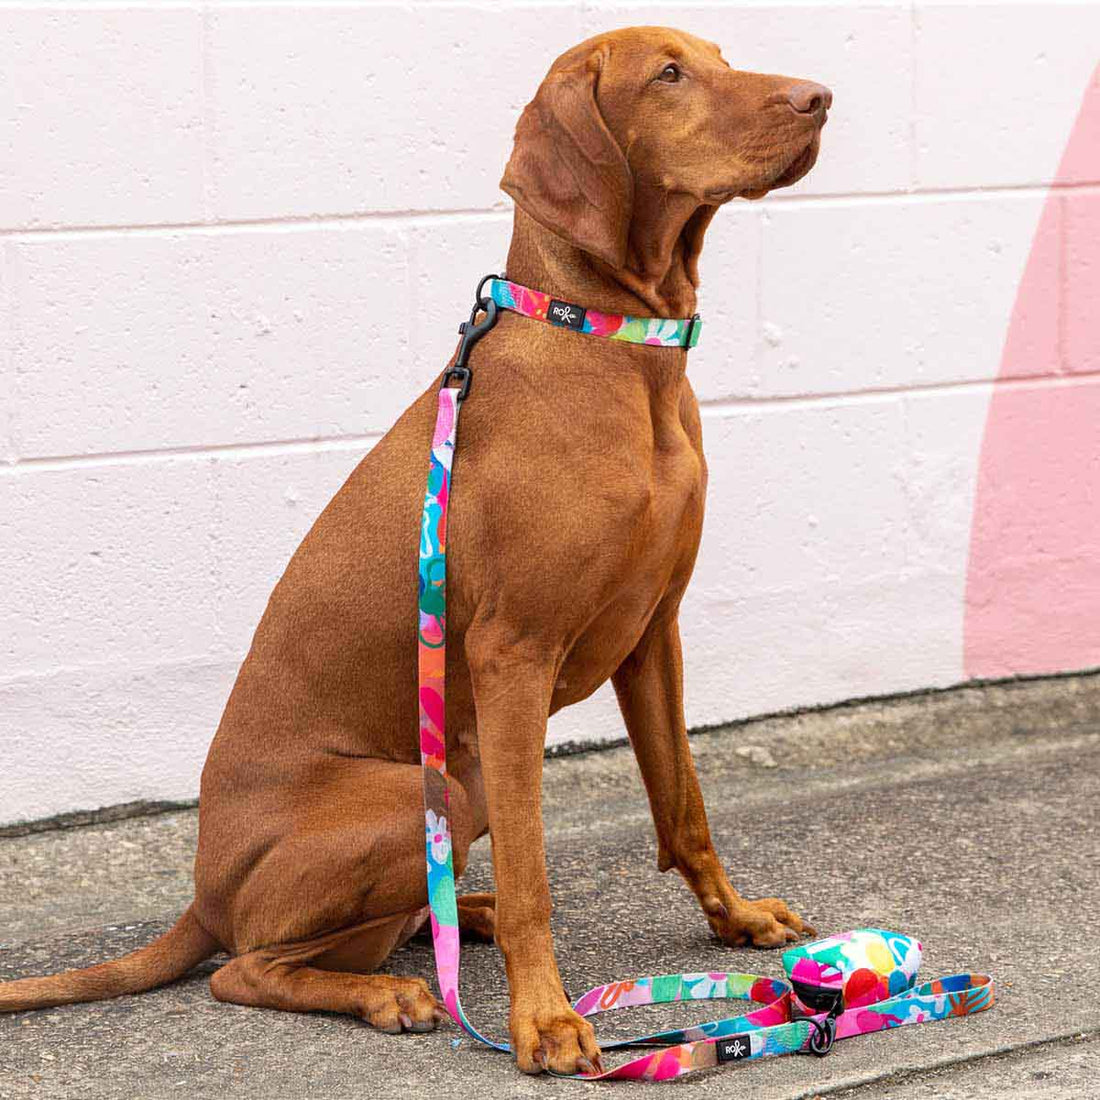 RO x Steph Chapman Edible Blooms Dog Leash (Sml &amp; Med Only)